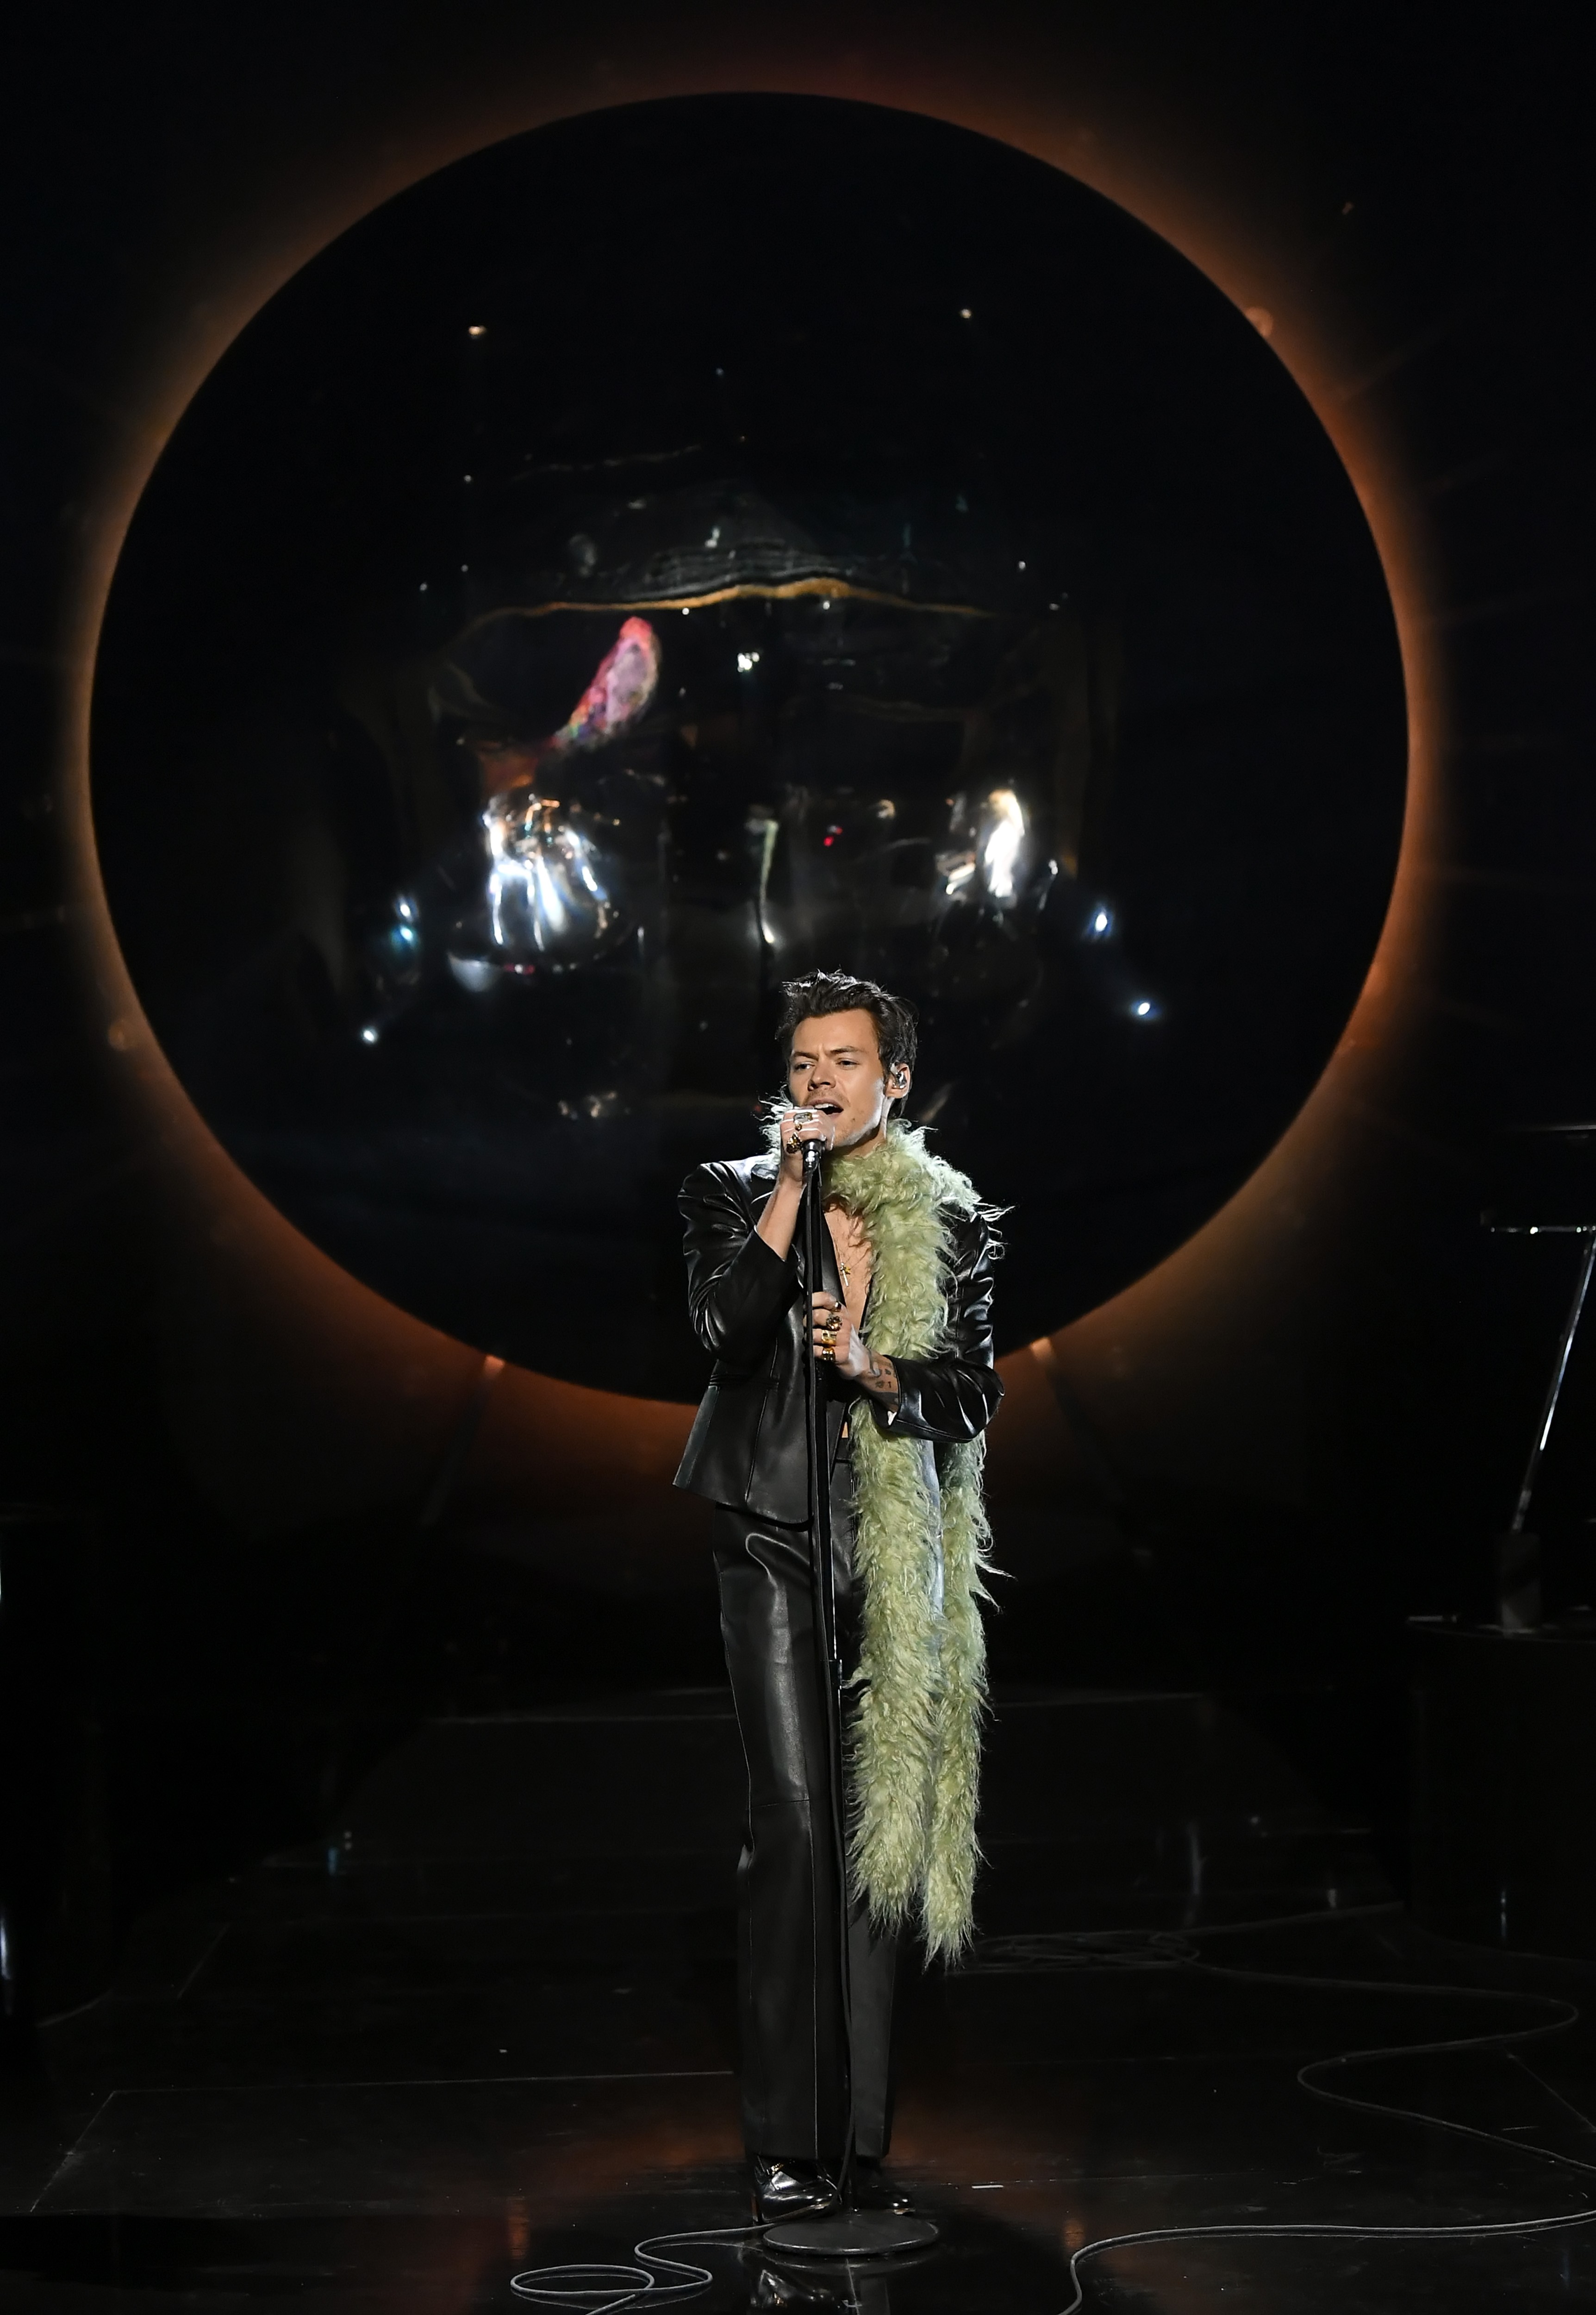 LOS ANGELES, CALIFORNIA: In this image released on March 14, Harry Styles performs onstage during the 63rd Annual GRAMMY Awards at Los Angeles Convention Center in Los Angeles, California and broadcast on March 14, 2021. (Photo by Kevin Winter/Getty Image (Foto: Getty Images for The Recording A)